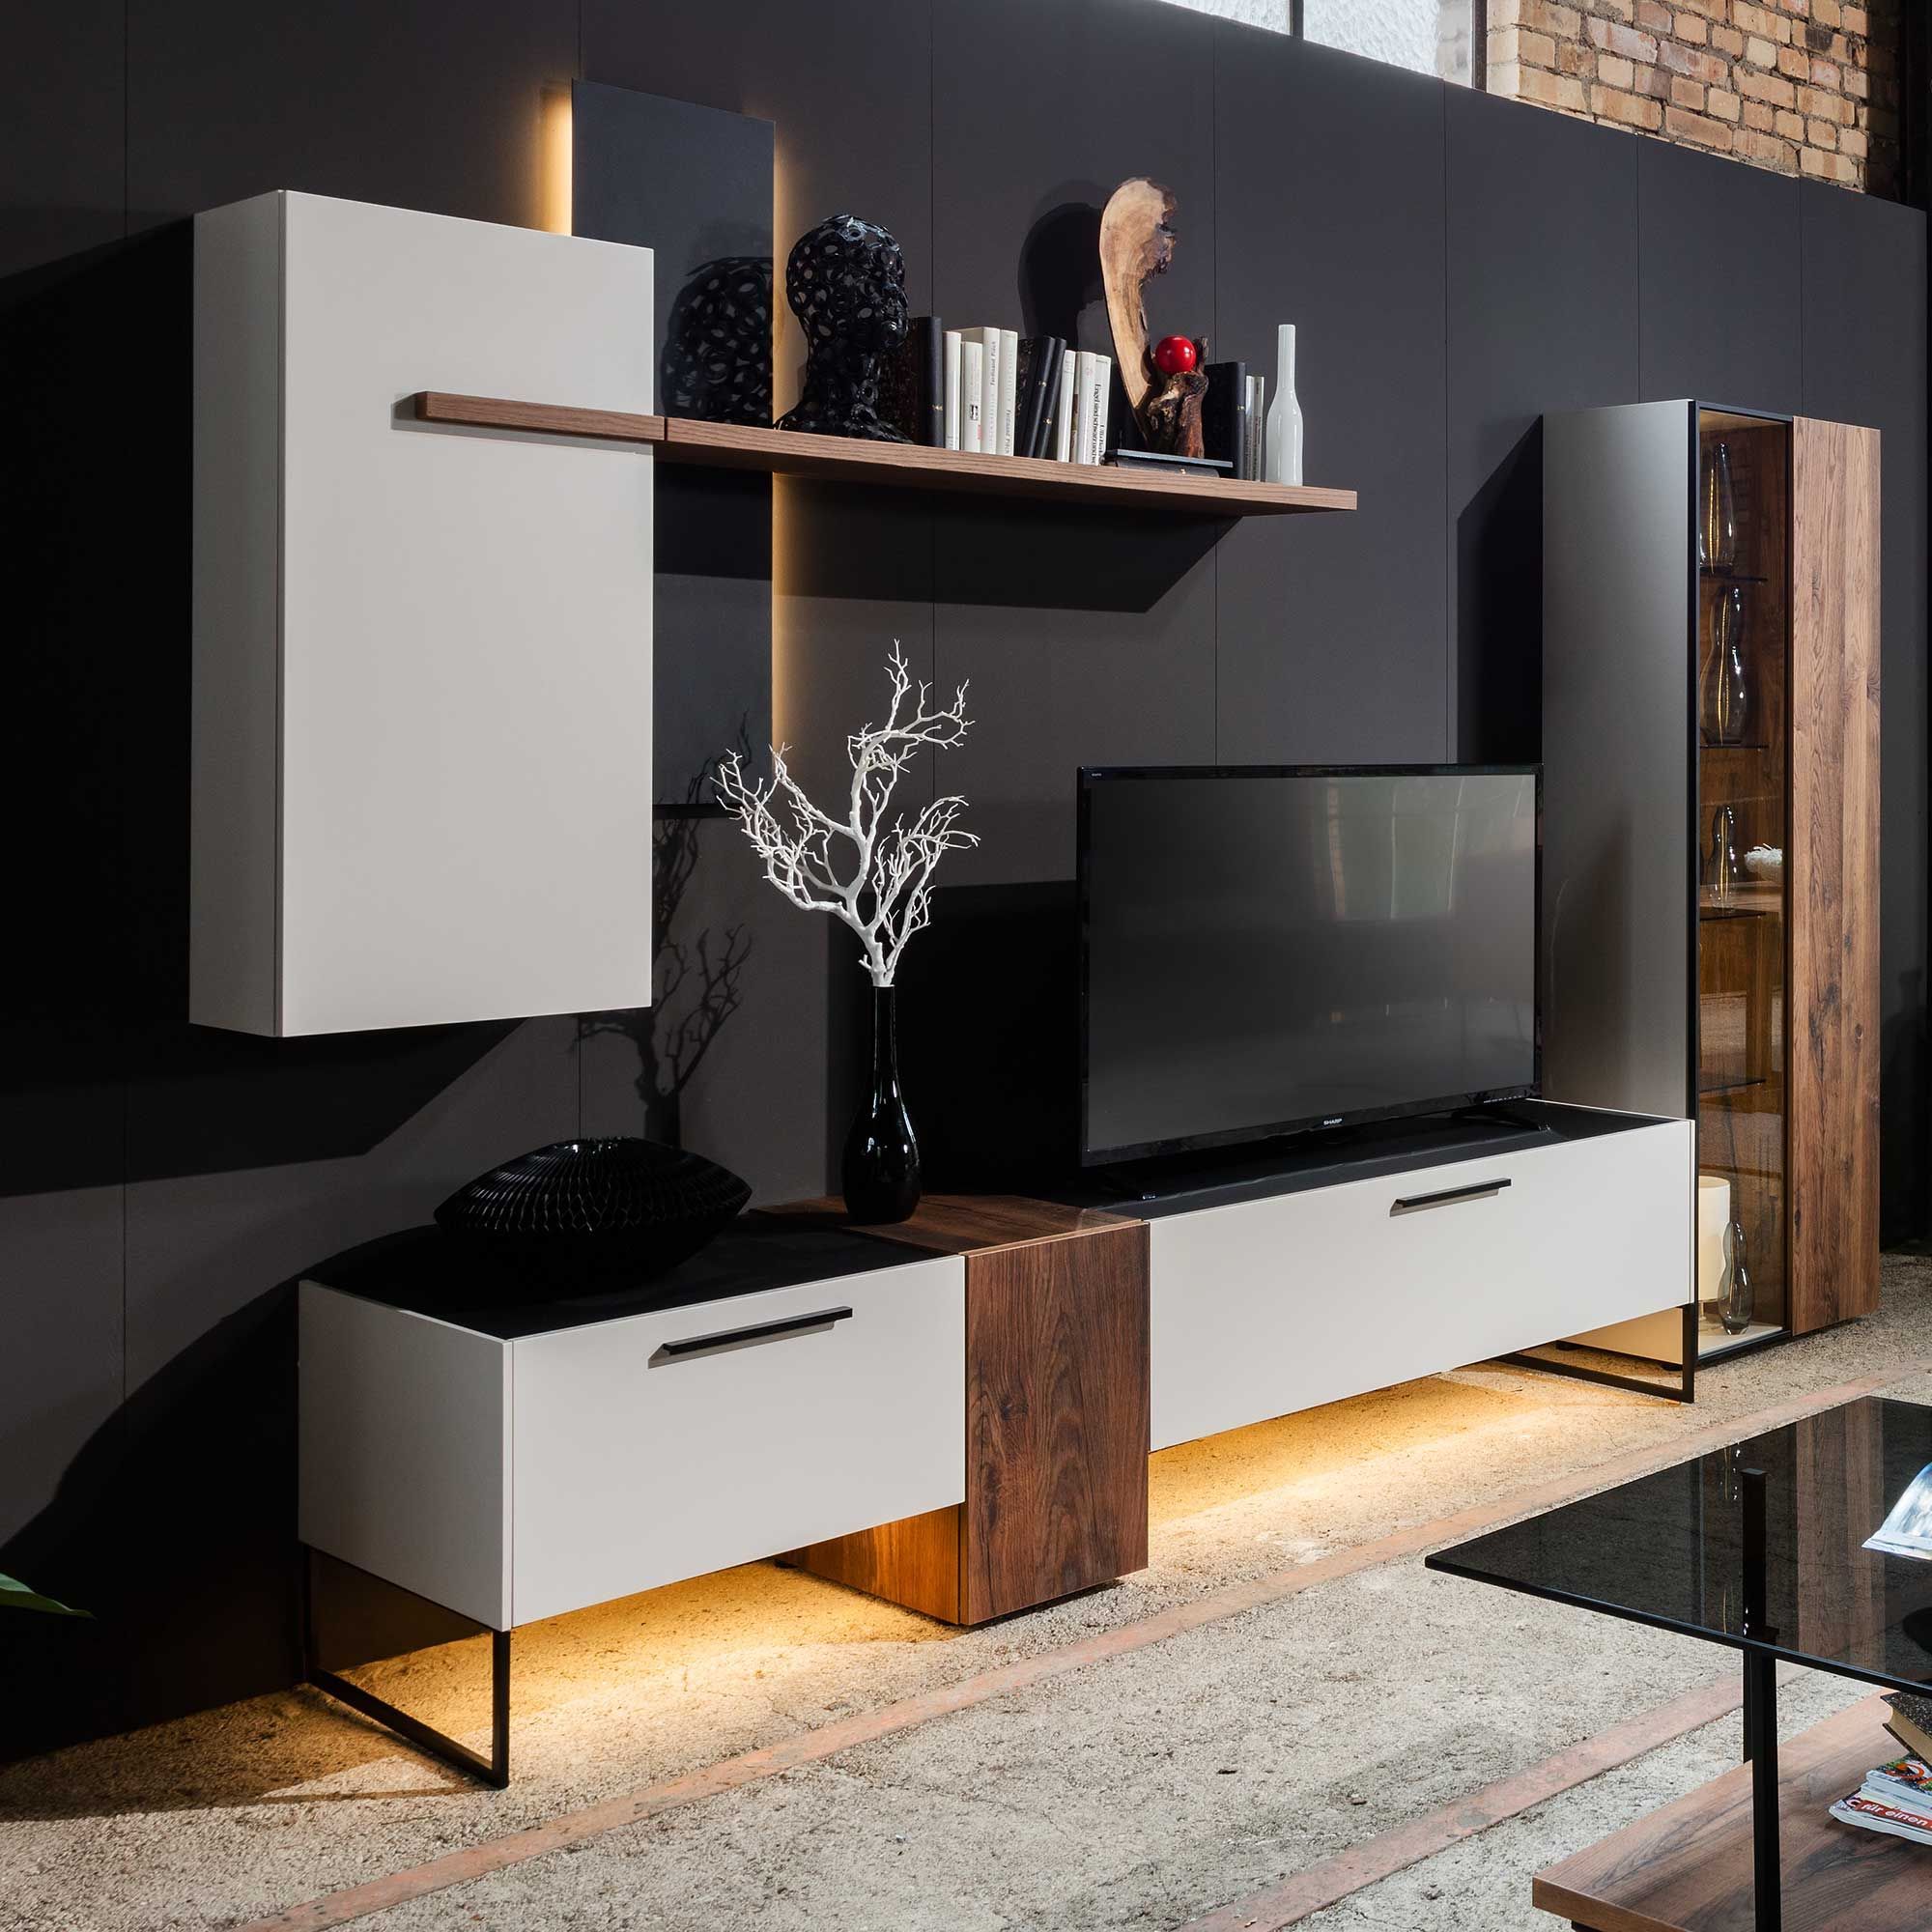 Blogg Tv Wall Unit Available Online At Barker & Stonehouse Pertaining To Tv Units With Storage (View 2 of 15)